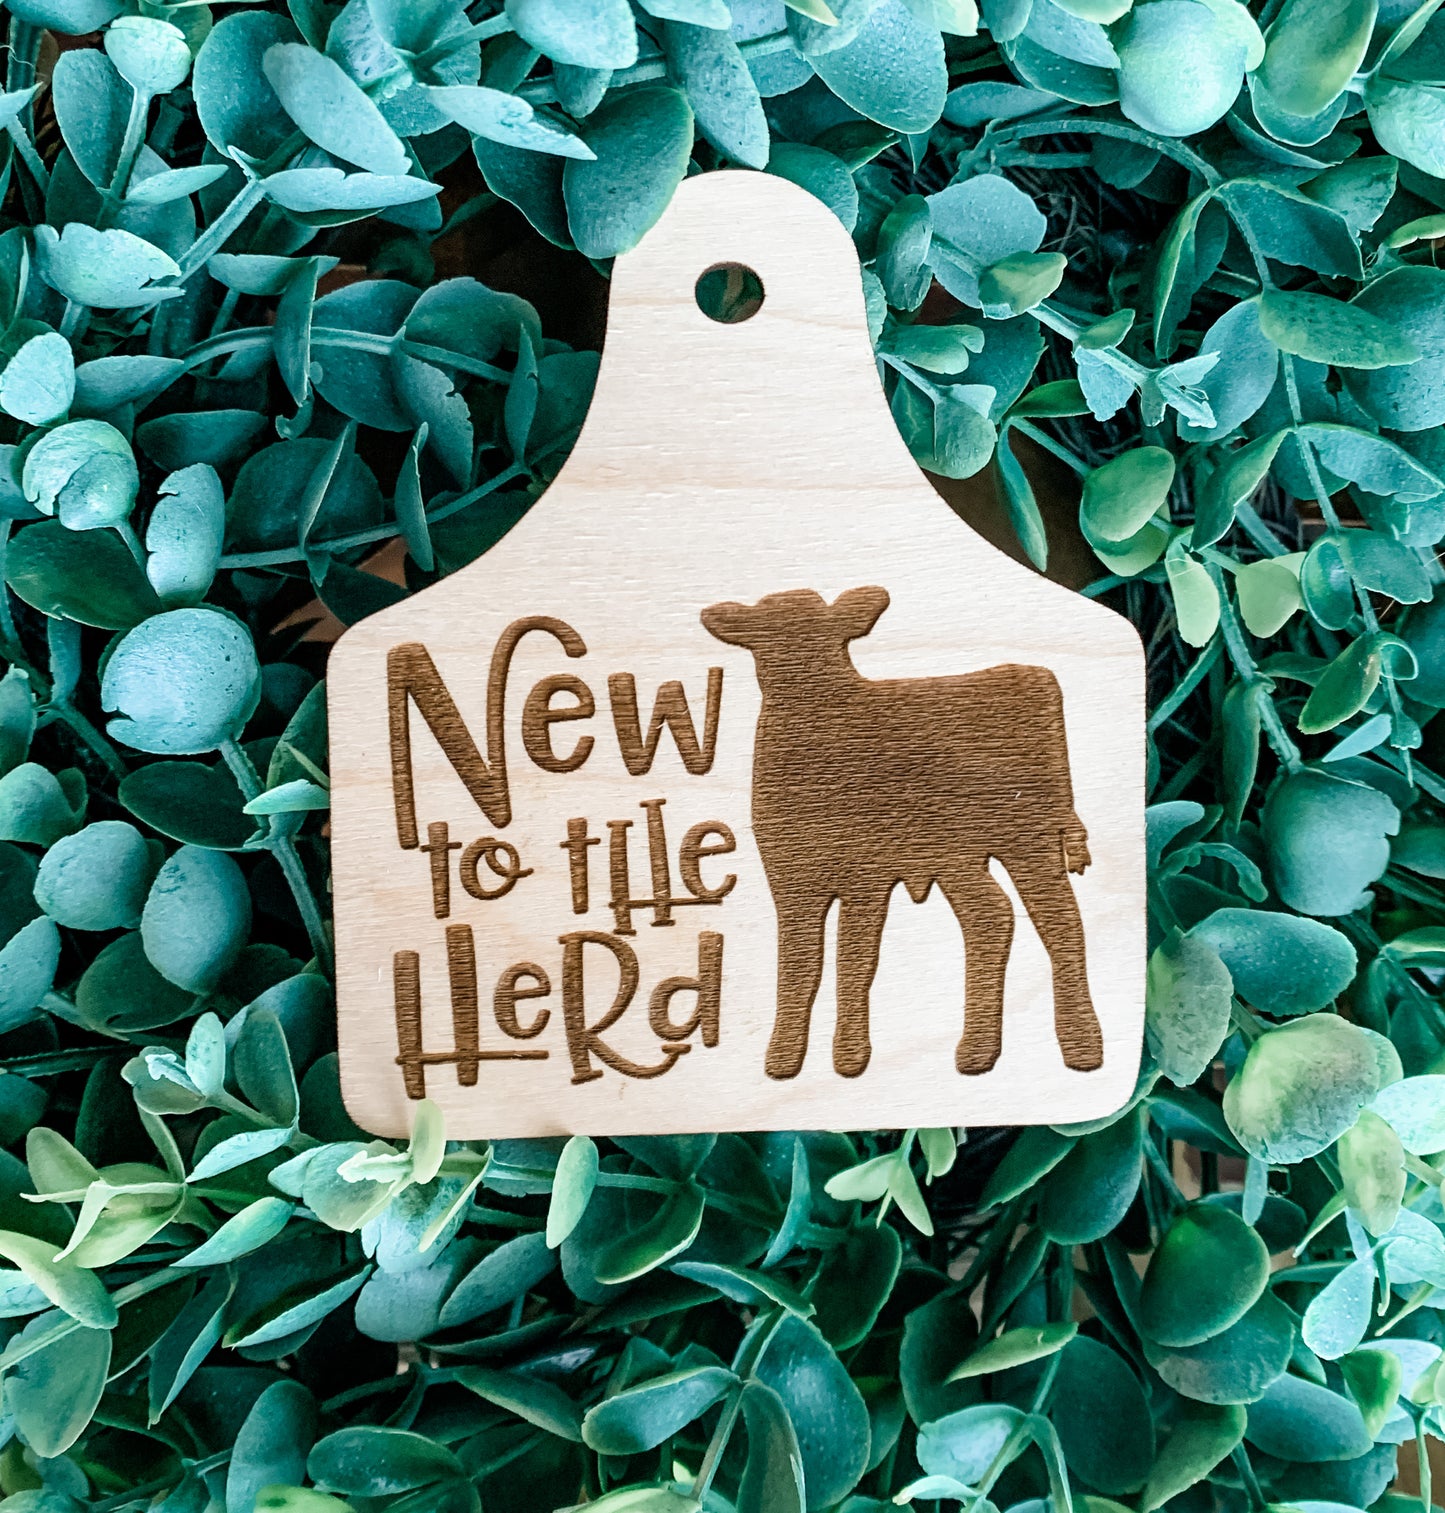 New to the herd tag